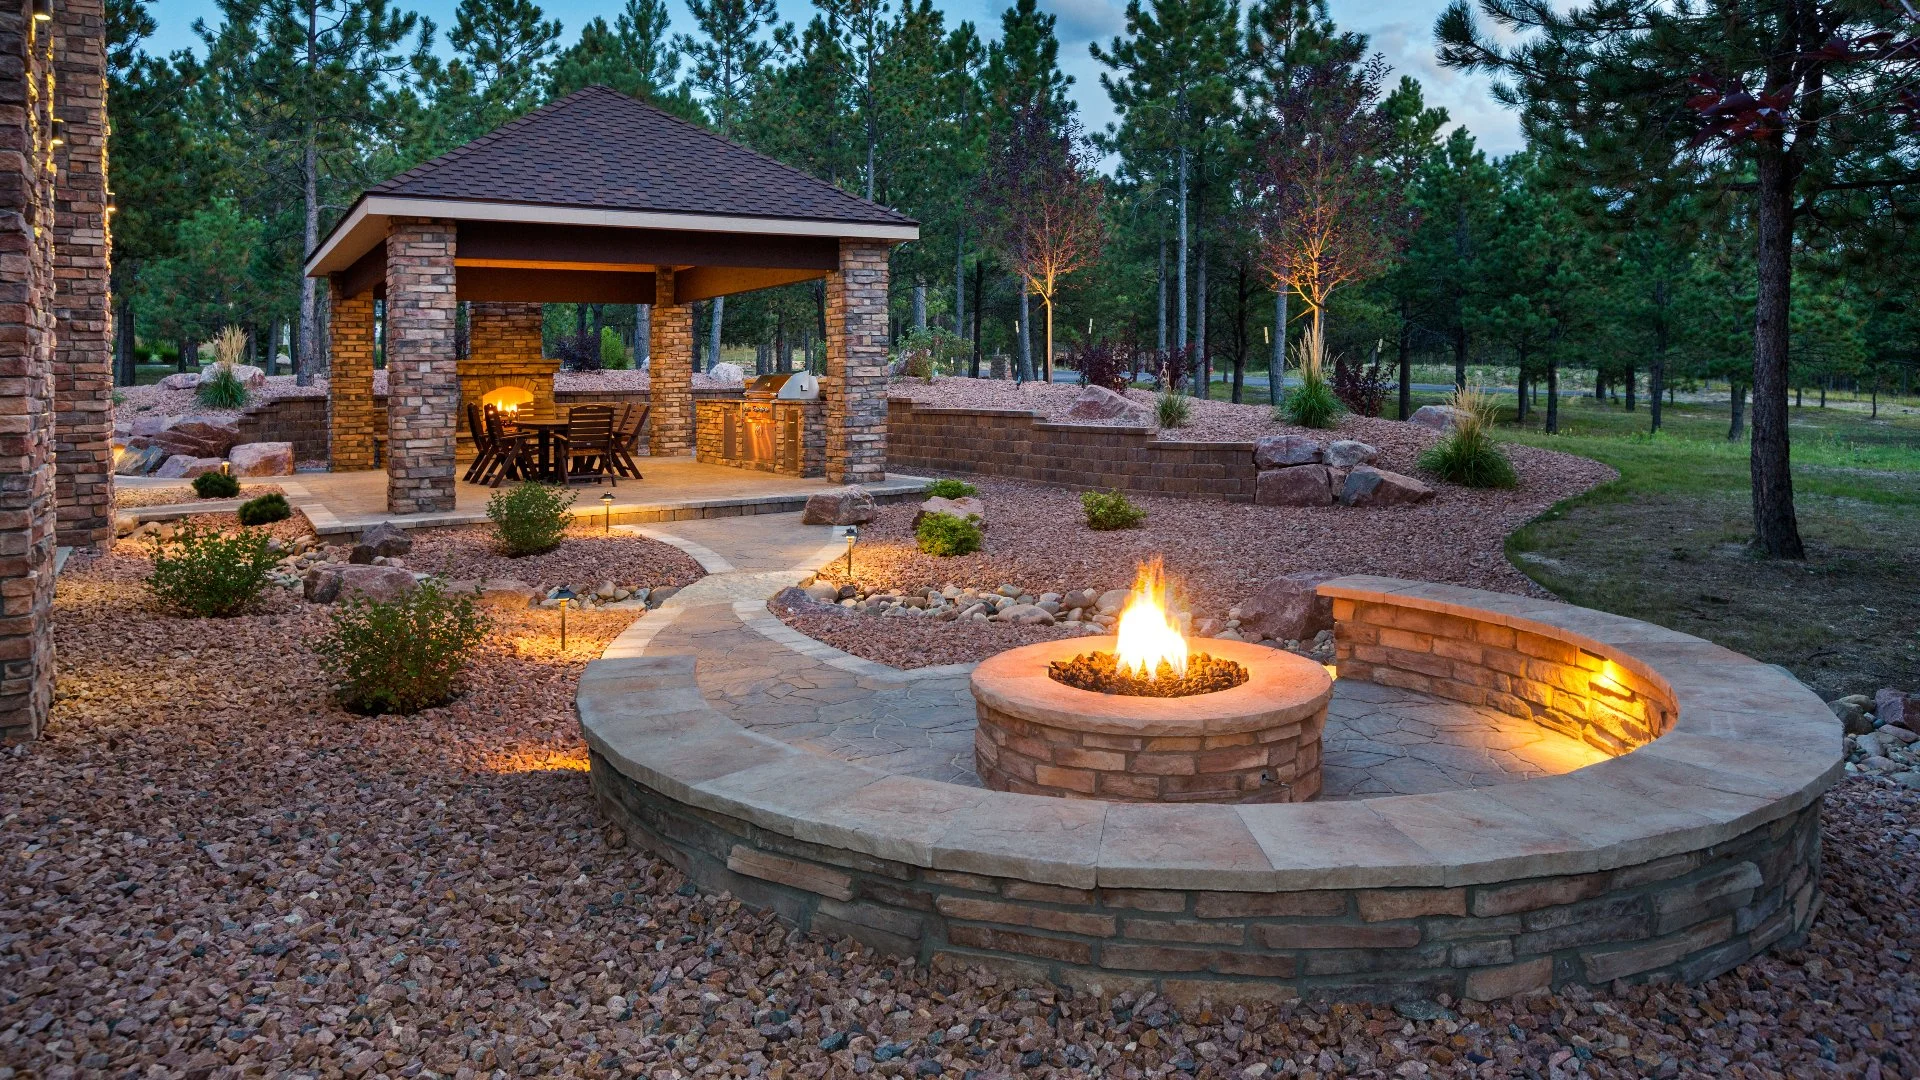 Plan on Investing in a Fire Feature? Consider These 3 Things First